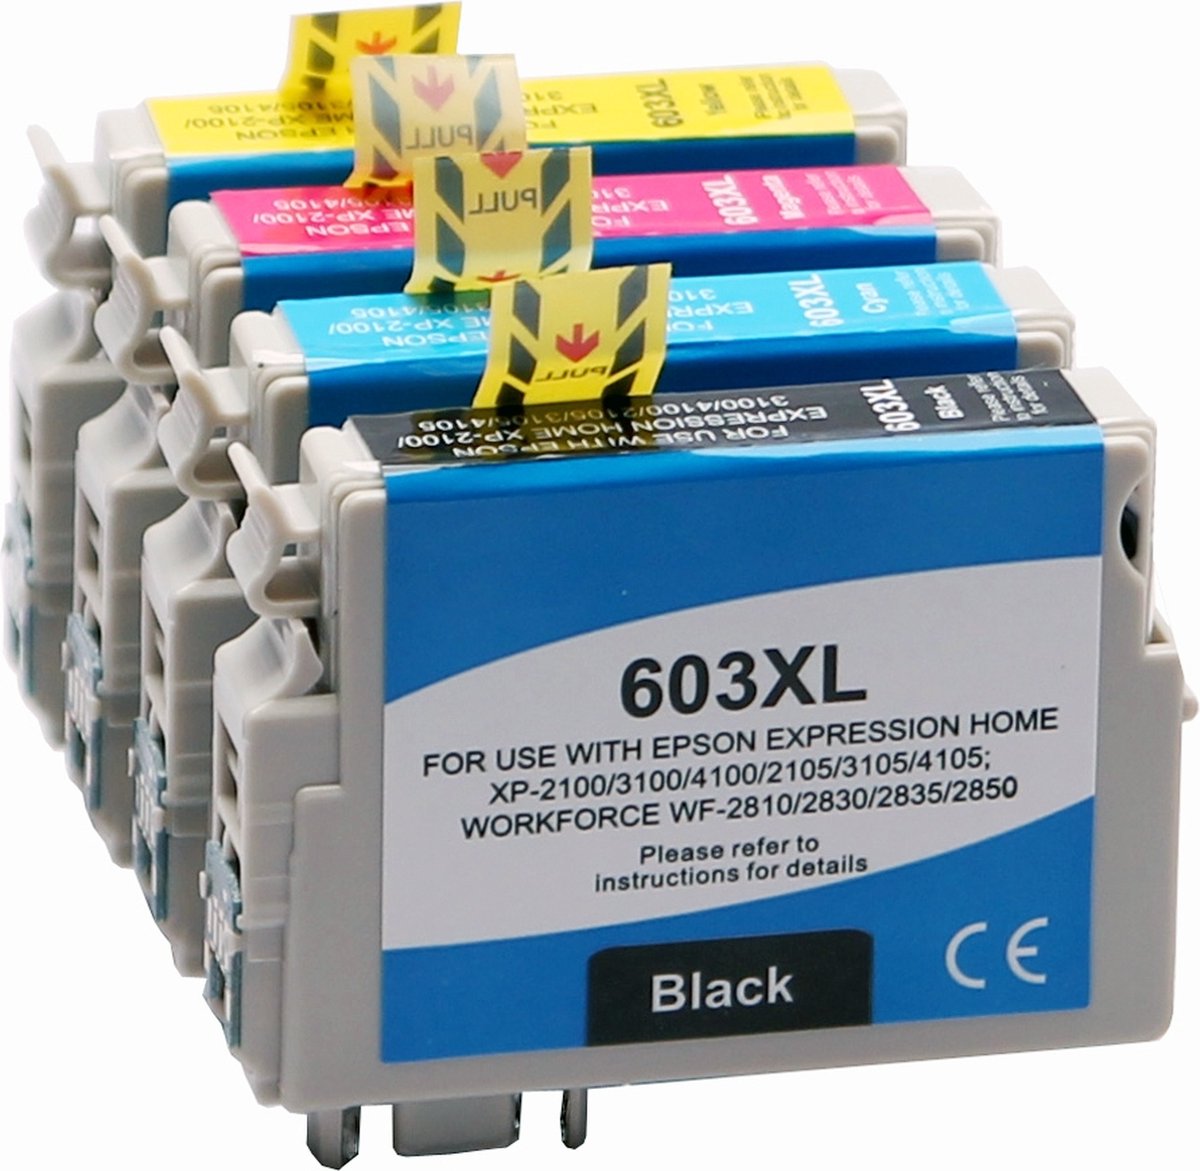 WYFYINK 603XL Ink Cartridge Compatible with Epson 603 XL Multipack